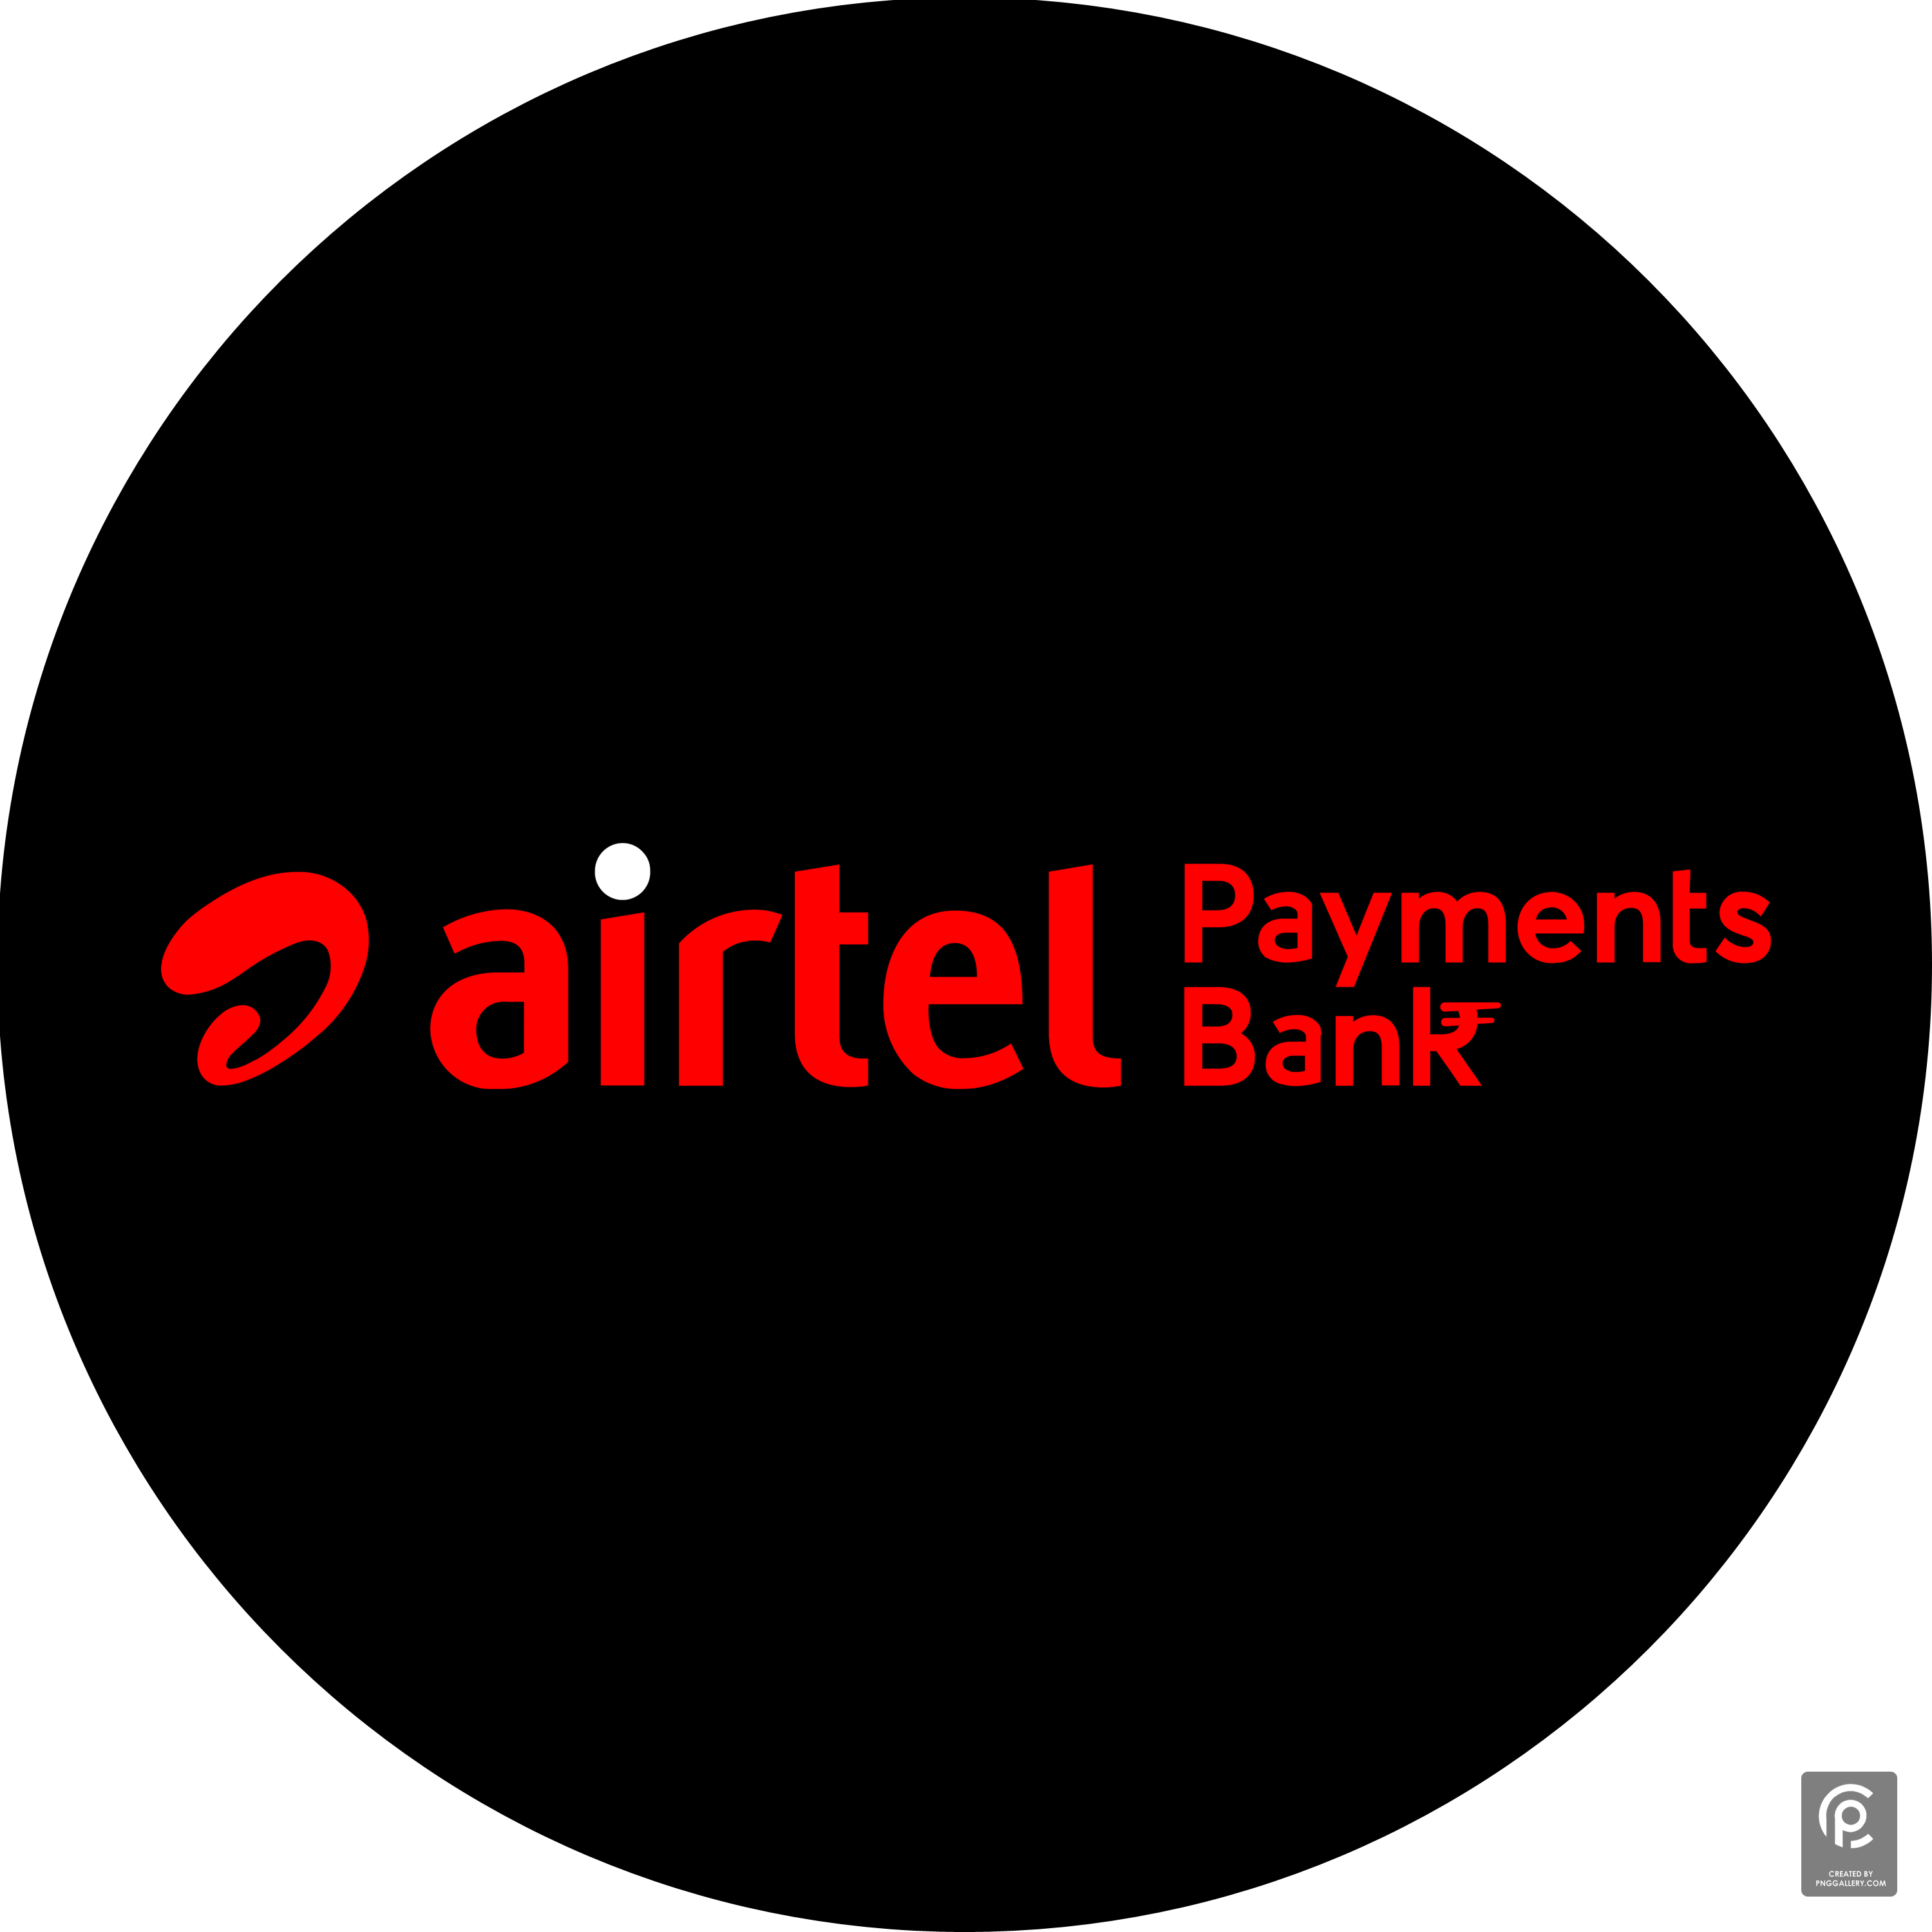 Airtel Payments Bank Logo Transparent Gallery